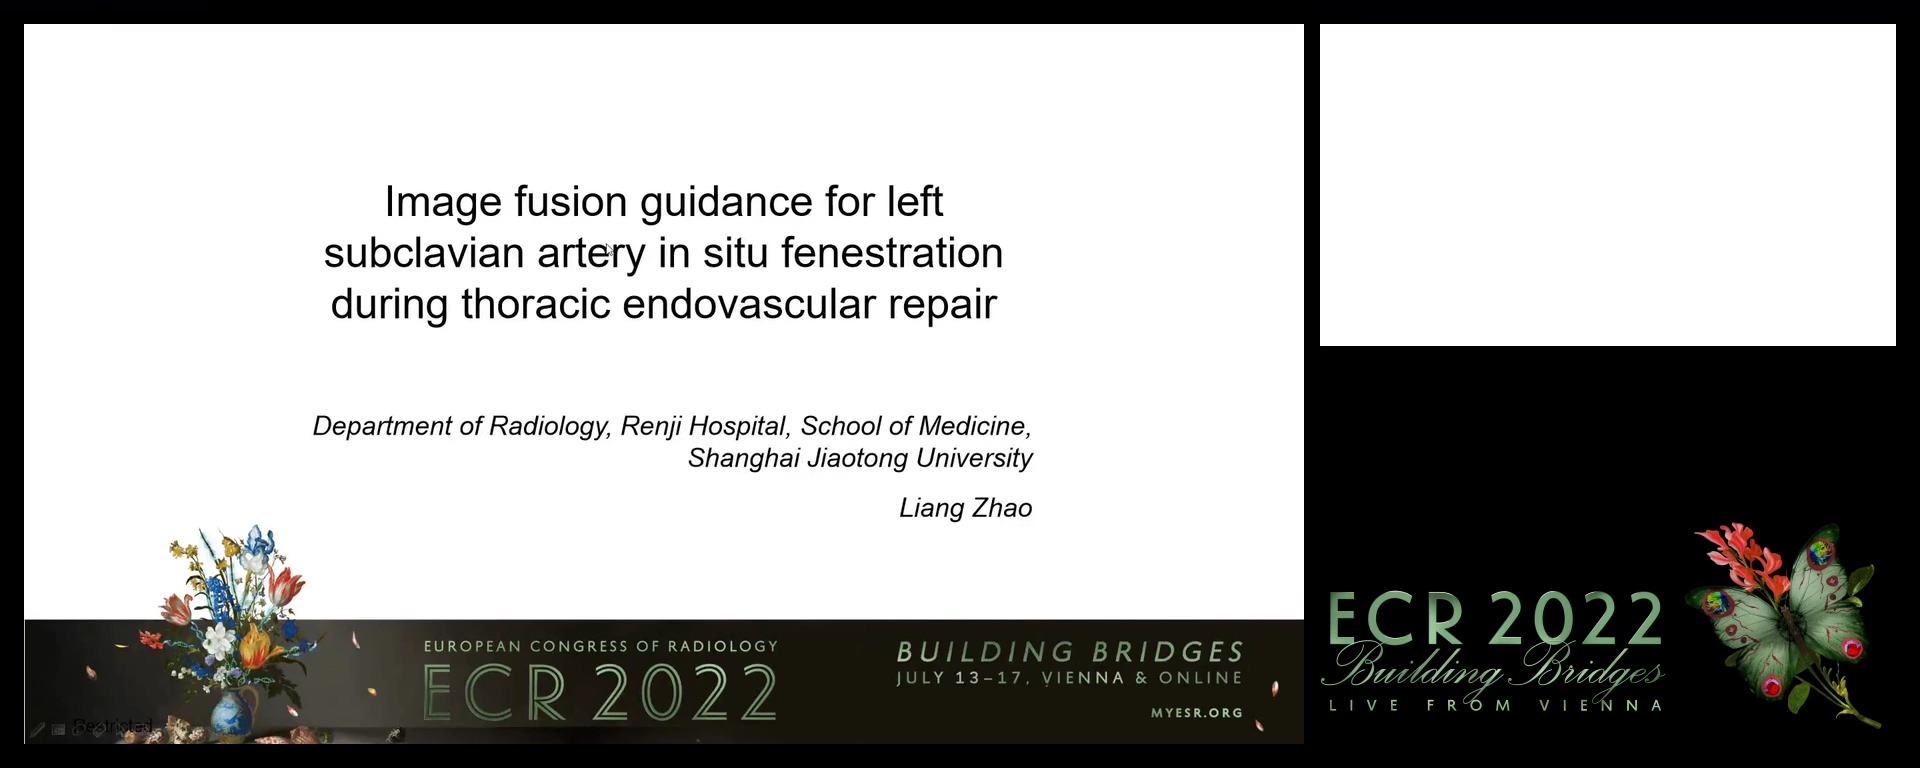 Image fusion guidance for in-situ fenestration during thoracic endovascular repair - Liang Zhao, Shanghai / CN